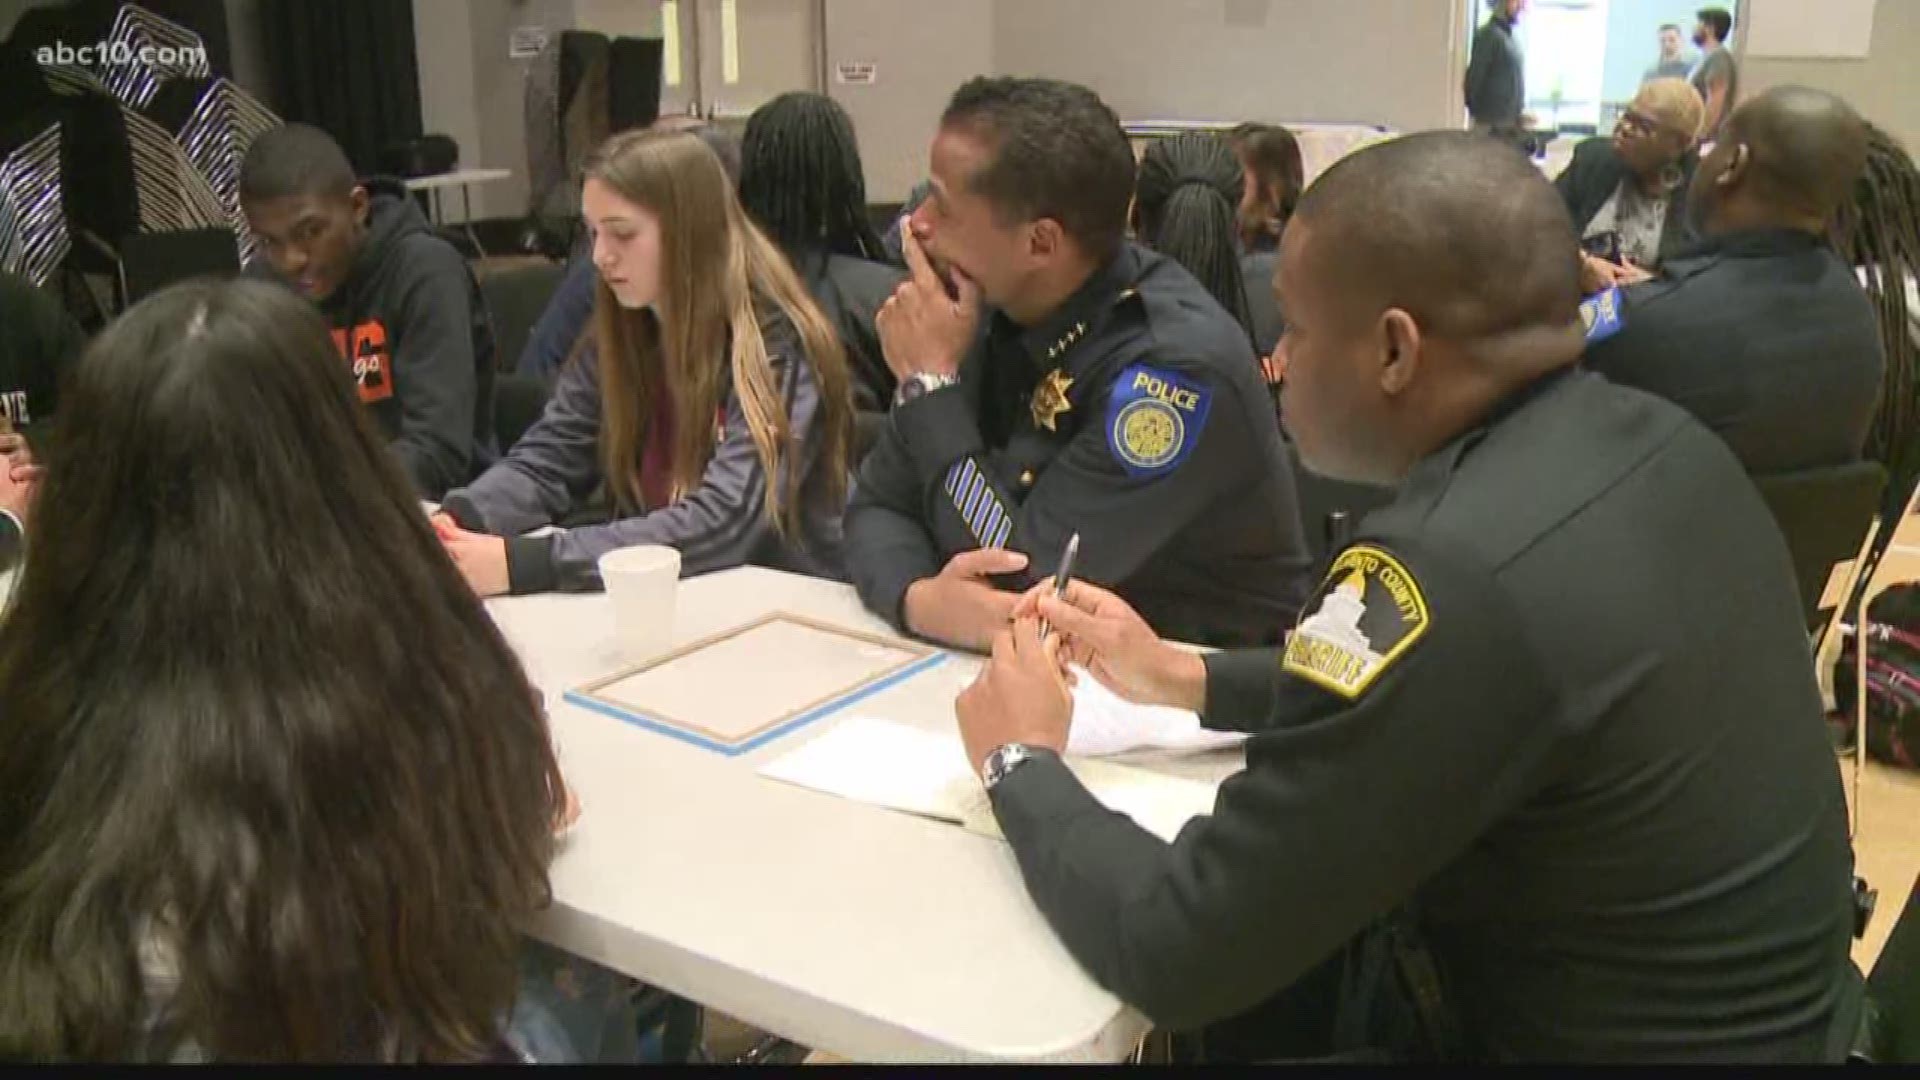 Students from Foothill High School sat down for a panel discussion with Sacramento Police and community leaders to discuss gun violence. (Mar. 20, 2018)